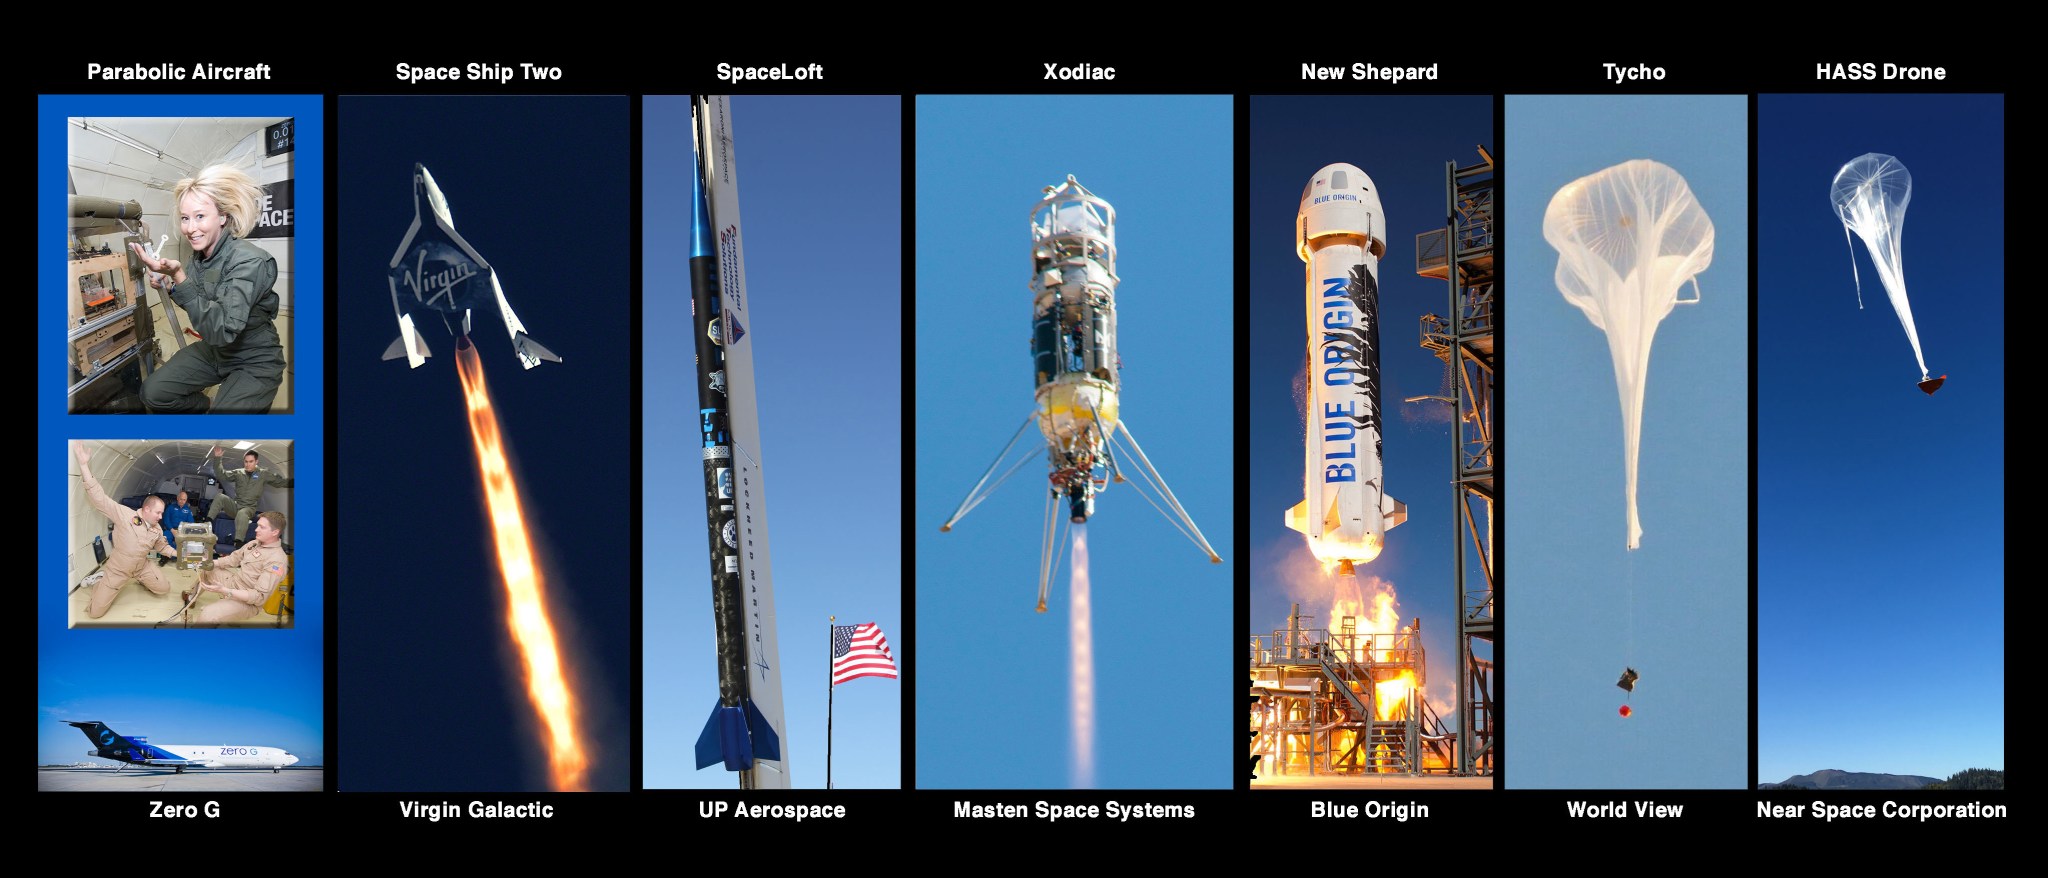 collage of suborbital vehicles from commercial flight providers Zero-G, Virgin Galactic, UP Aerospace, Masten Space Systems, Blue Origin, World View, and Near Space Corp.